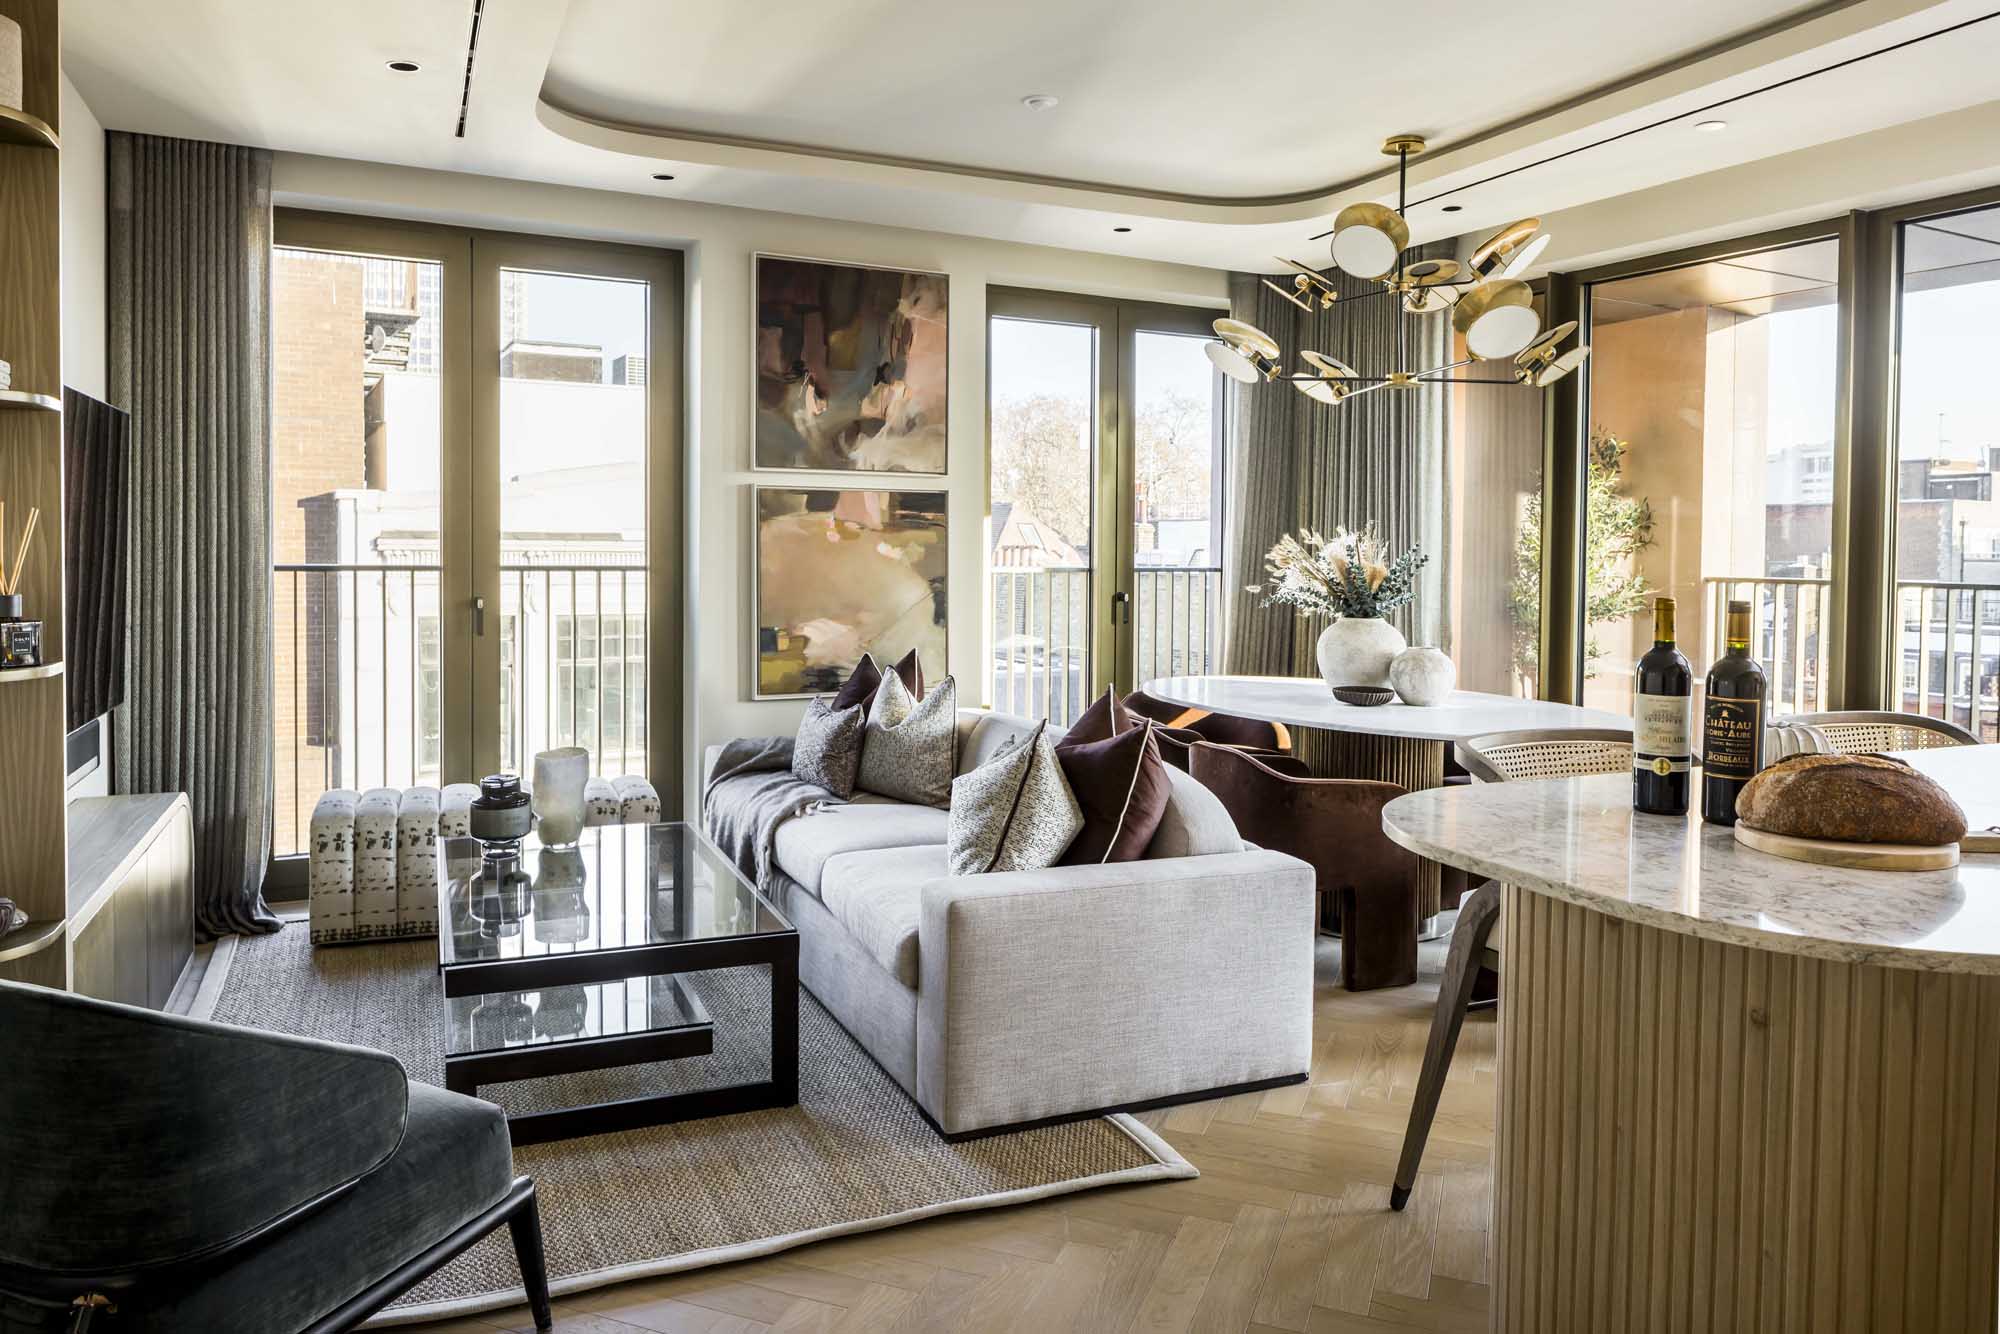 Galliard launches TCRW SOHO's penthouse collection designed by Olivia Alexandra Interior Design